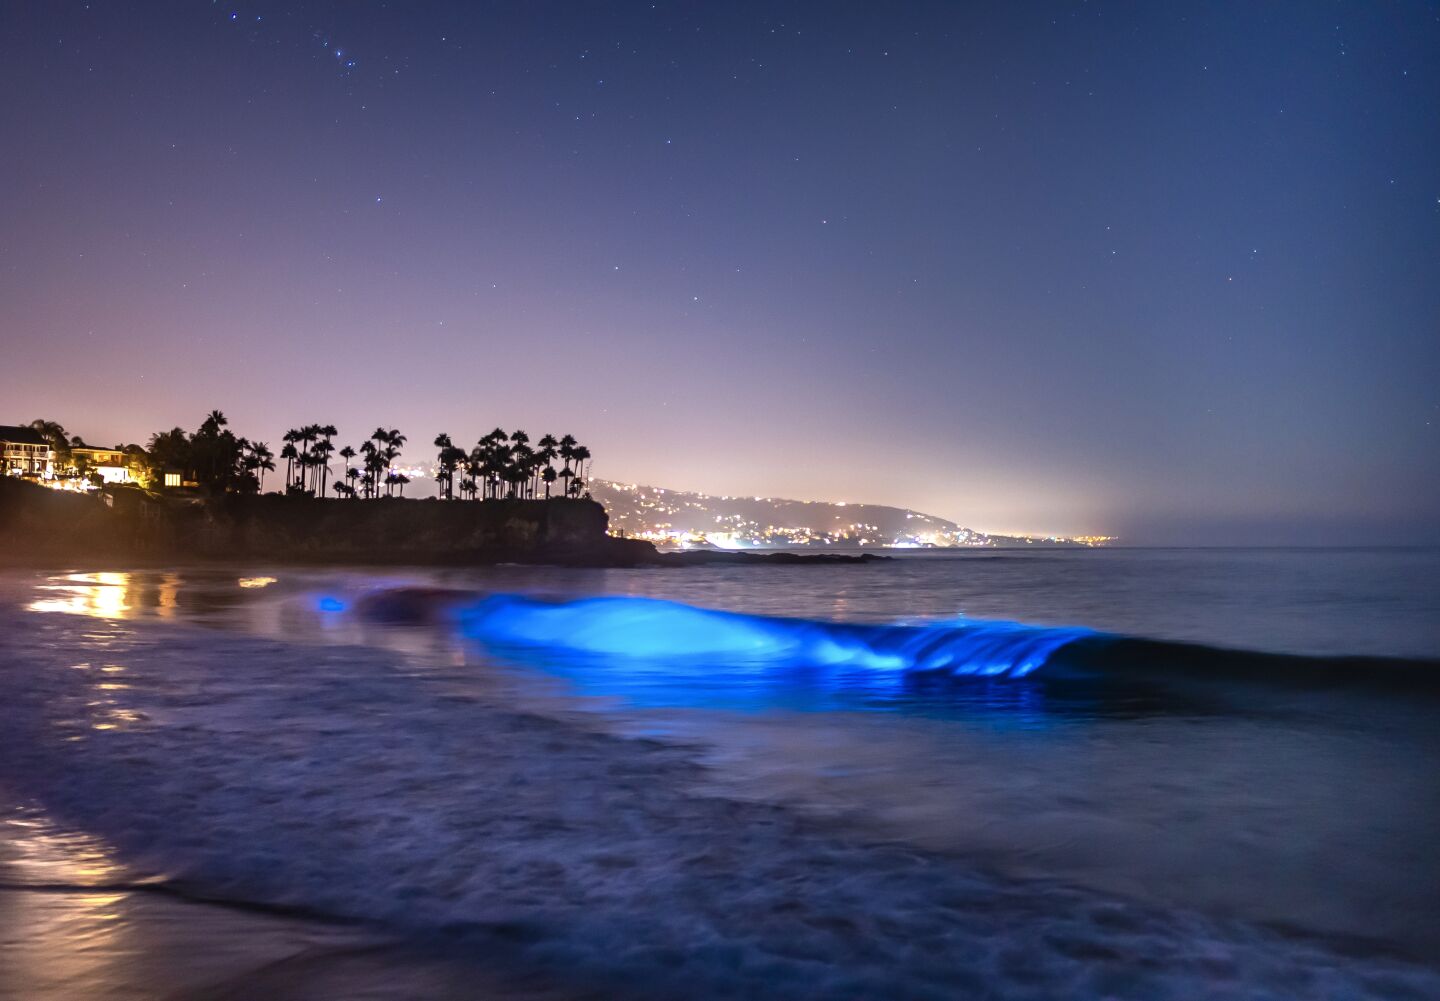 How to see the blue glow of bioluminescence in L.A. - Los Angeles Times